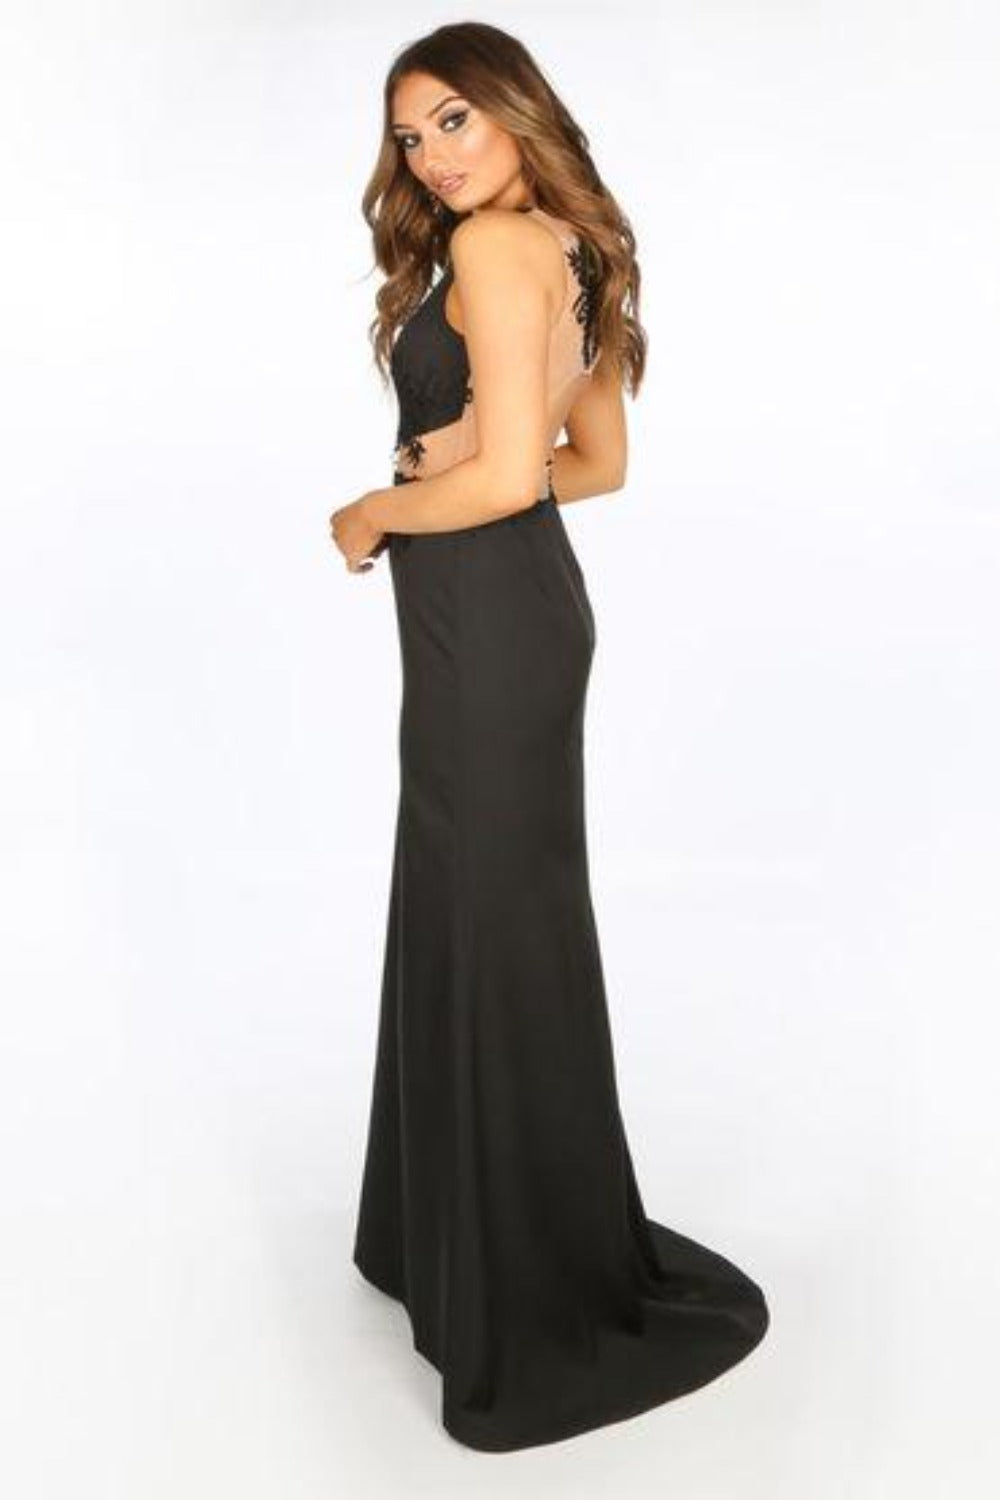 Black Bandeau Maxi Dress With Chiffon Applique Over-lay